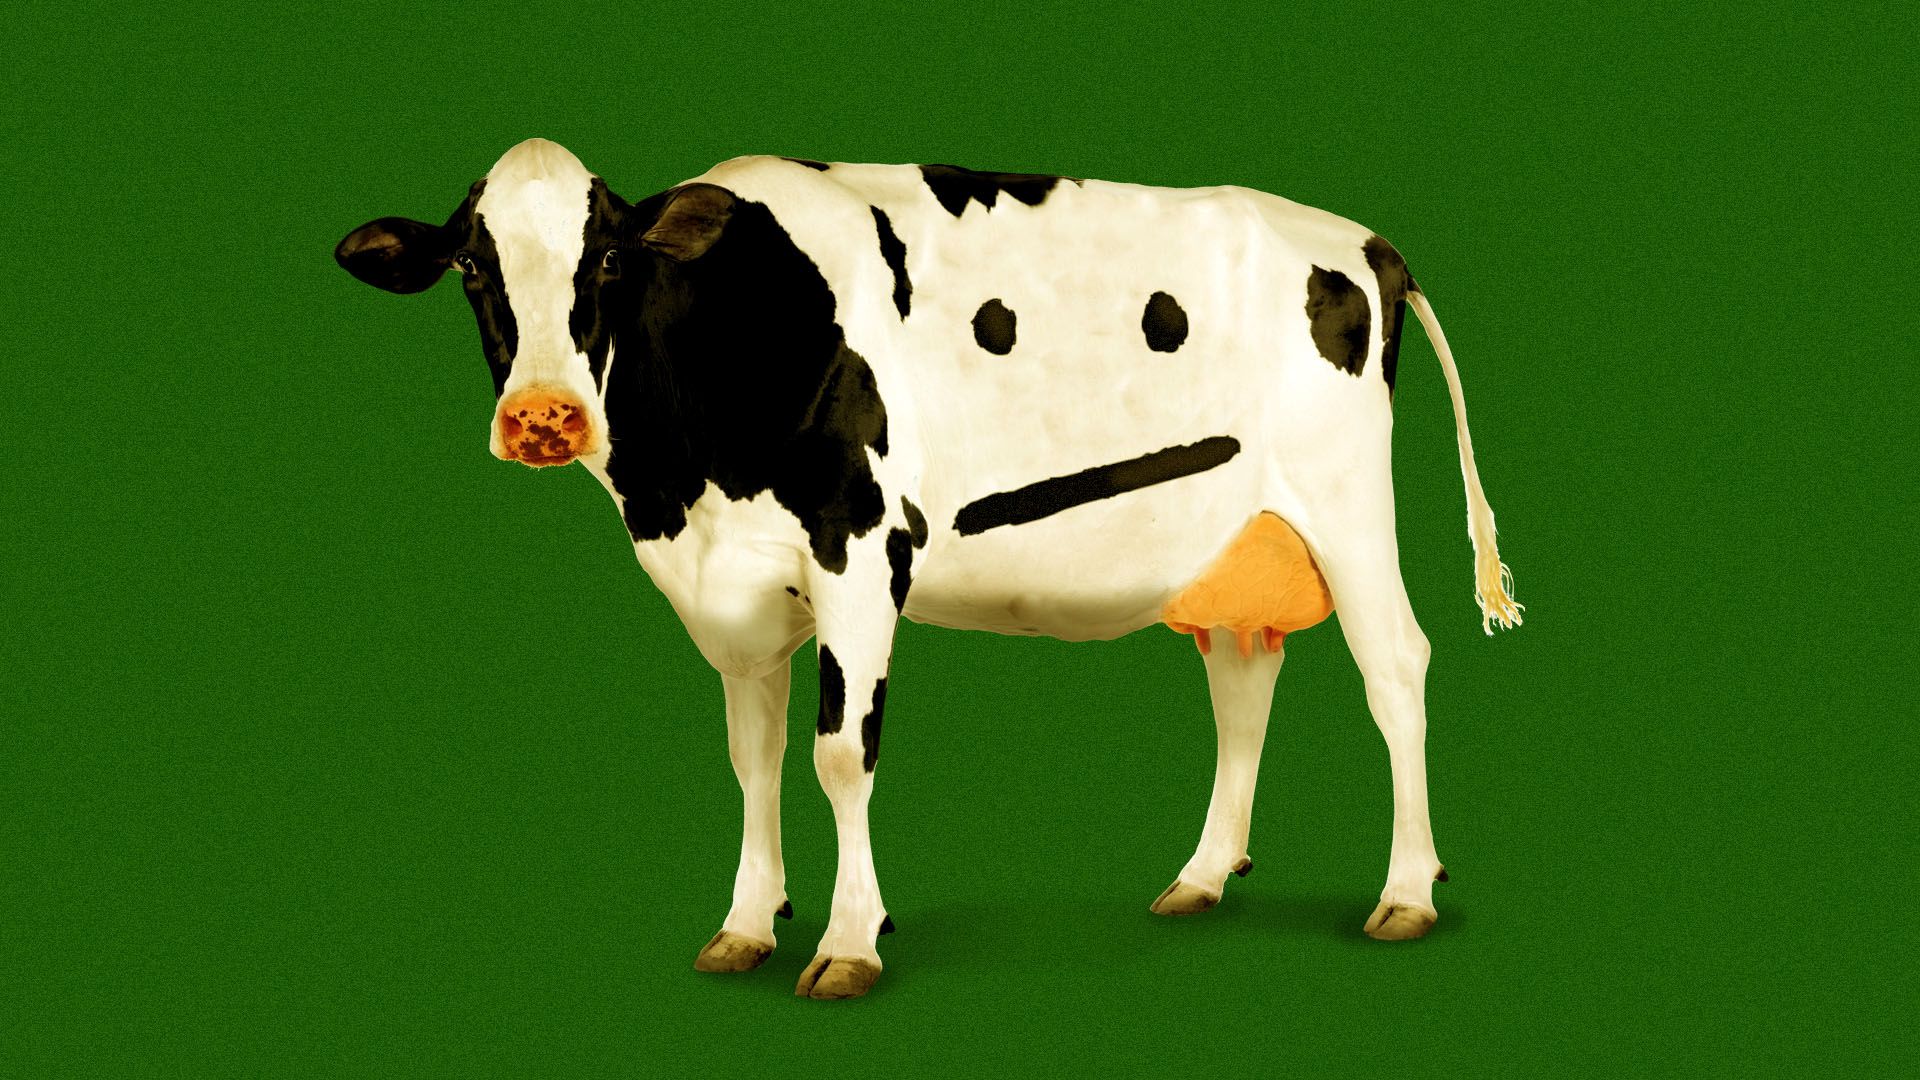 Illustration of a cow with markings in the shape of a neutral face